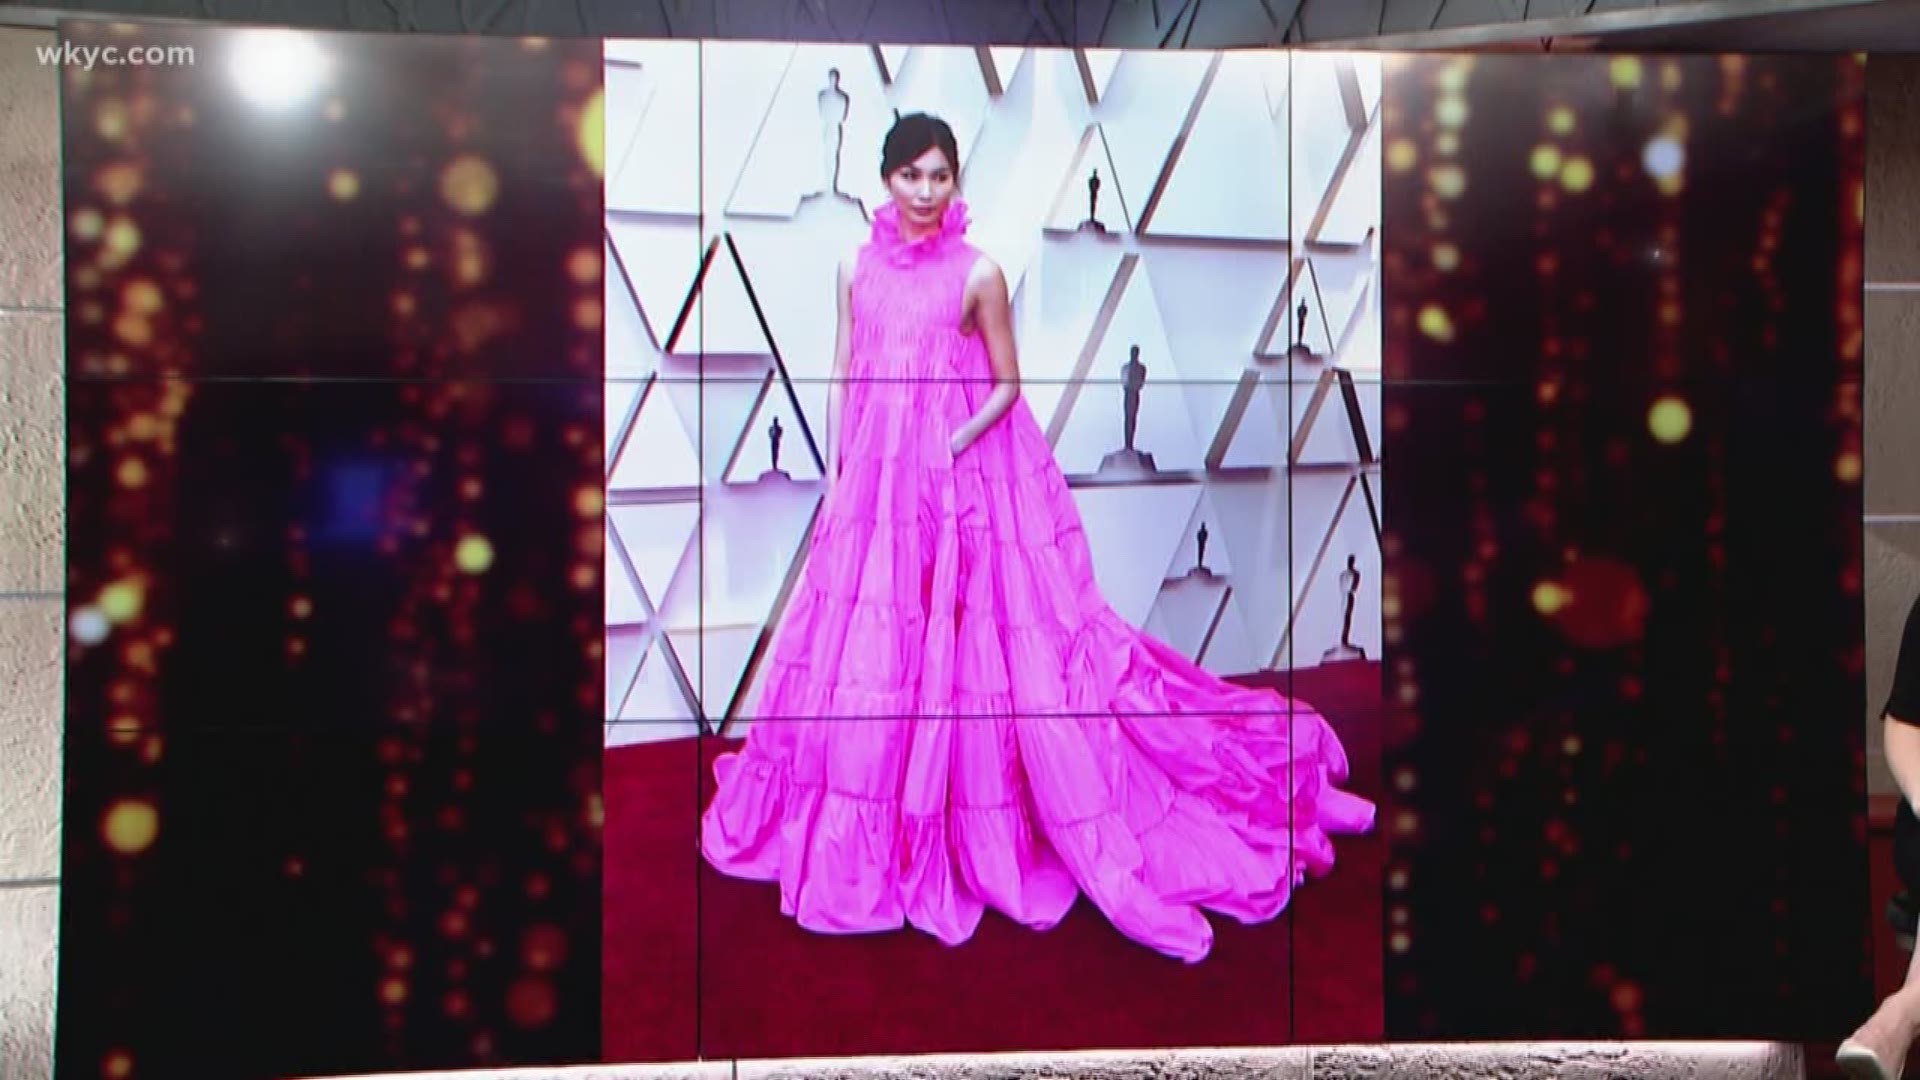 Feb. 25, 2019: Who wore it best? Hallie Abrams, known as the 'wardrobe consultant,' dropped by to share her thoughts on the fashion and trends from Sunday night's Academy Awards.